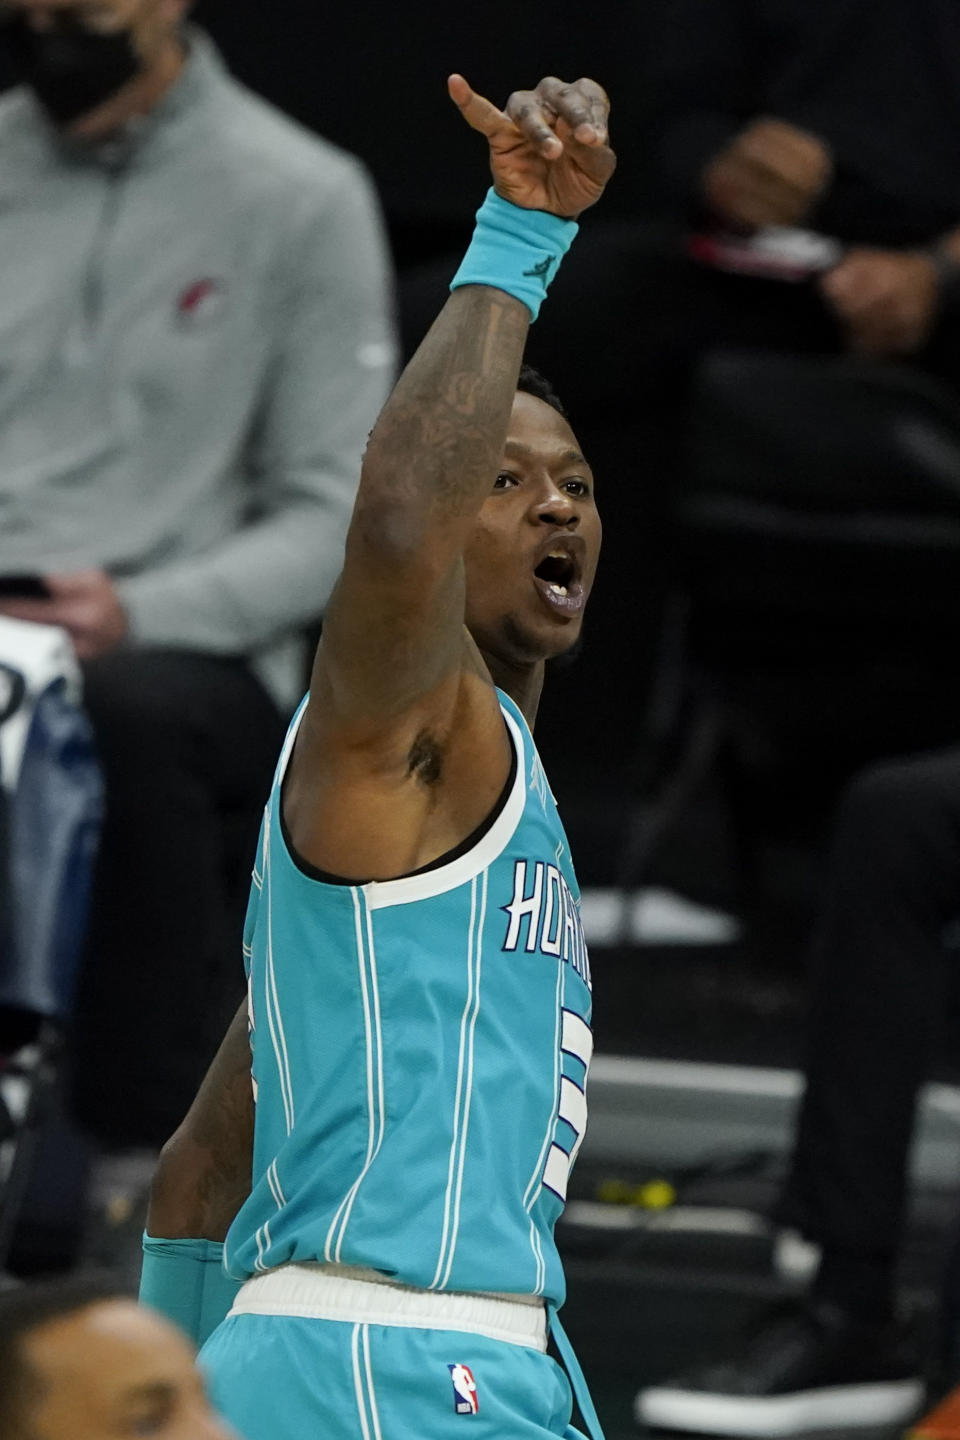 Charlotte Hornets guard Terry Rozier celebrates after scoring against the Portland Trail Blazers during the second half in an NBA basketball game on Sunday, April 18, 2021, in Charlotte, N.C. (AP Photo/Chris Carlson)